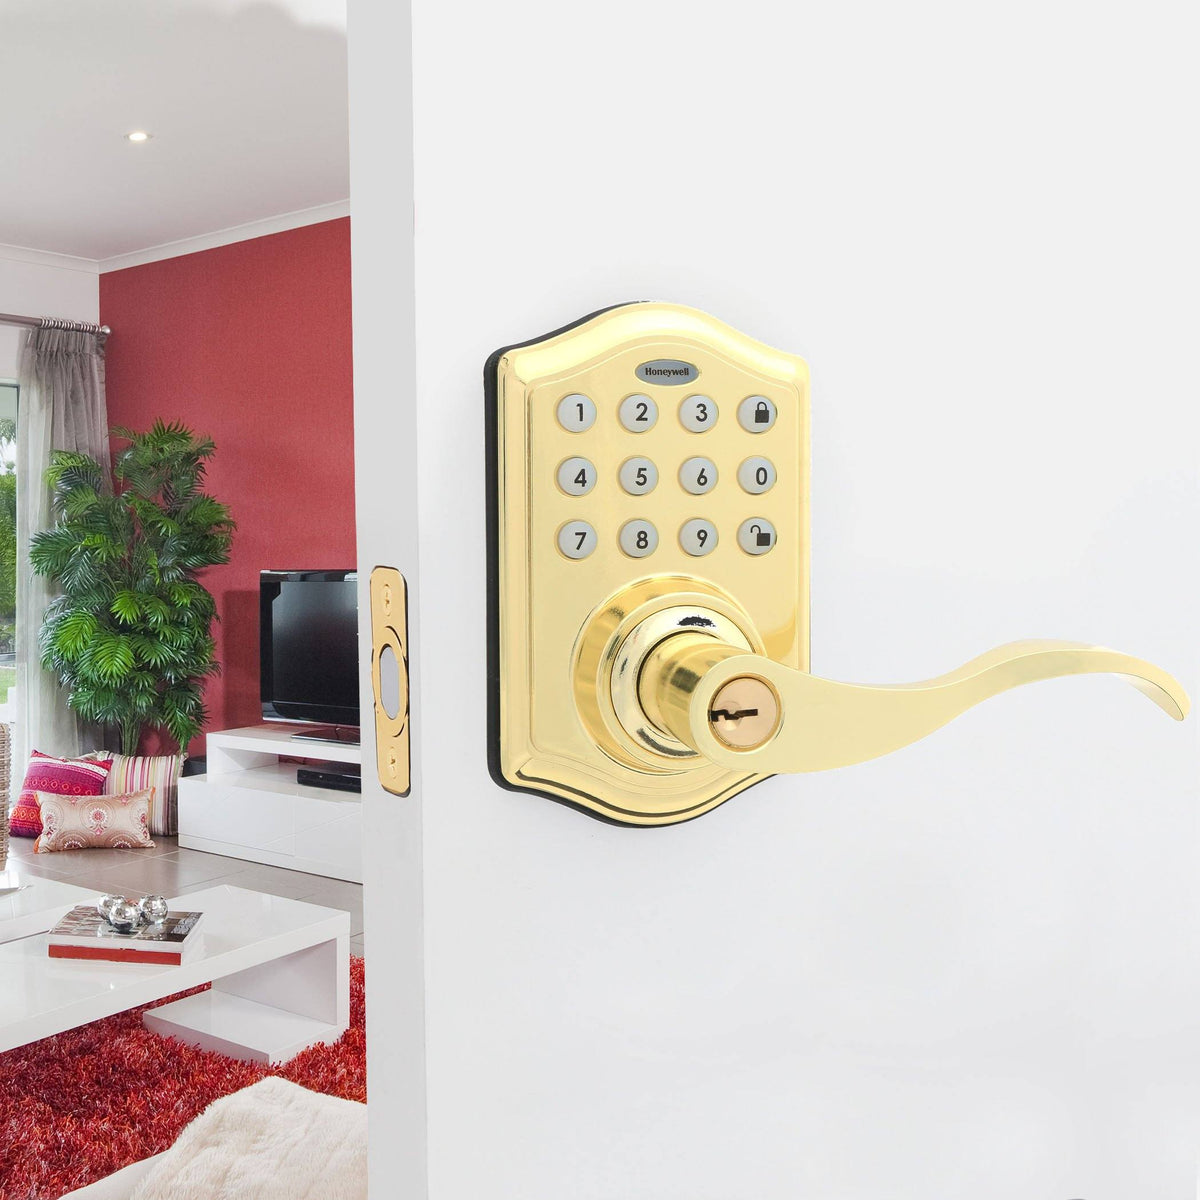 Honeywell 8734001 Electronic Entry Lever Door Lock with Keypad in Polished Brass